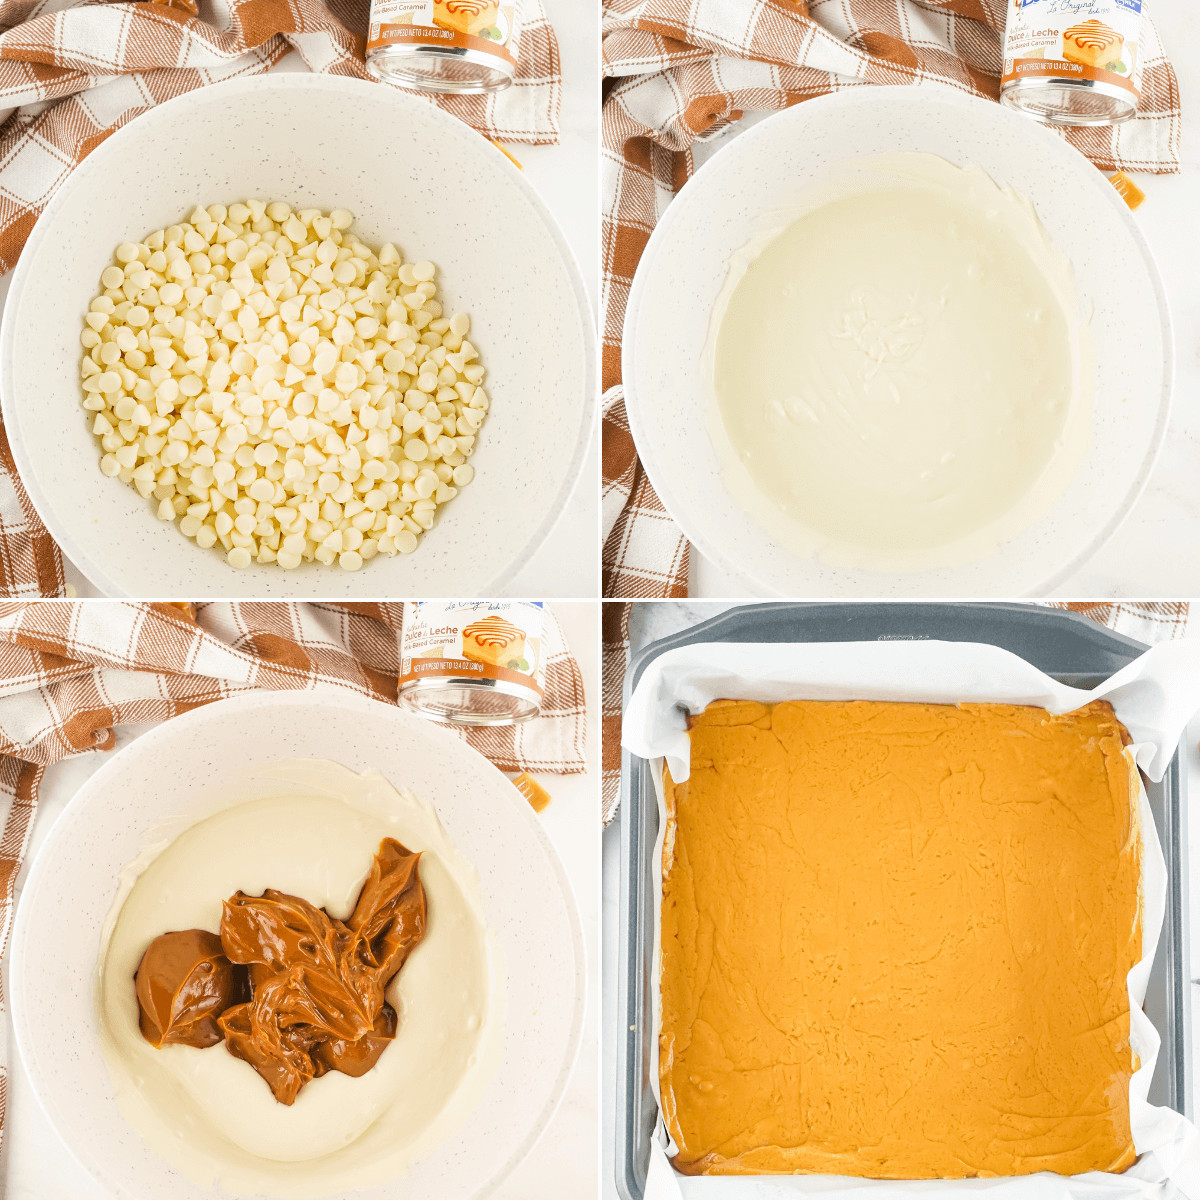 Steps in creating the caramel fudge.